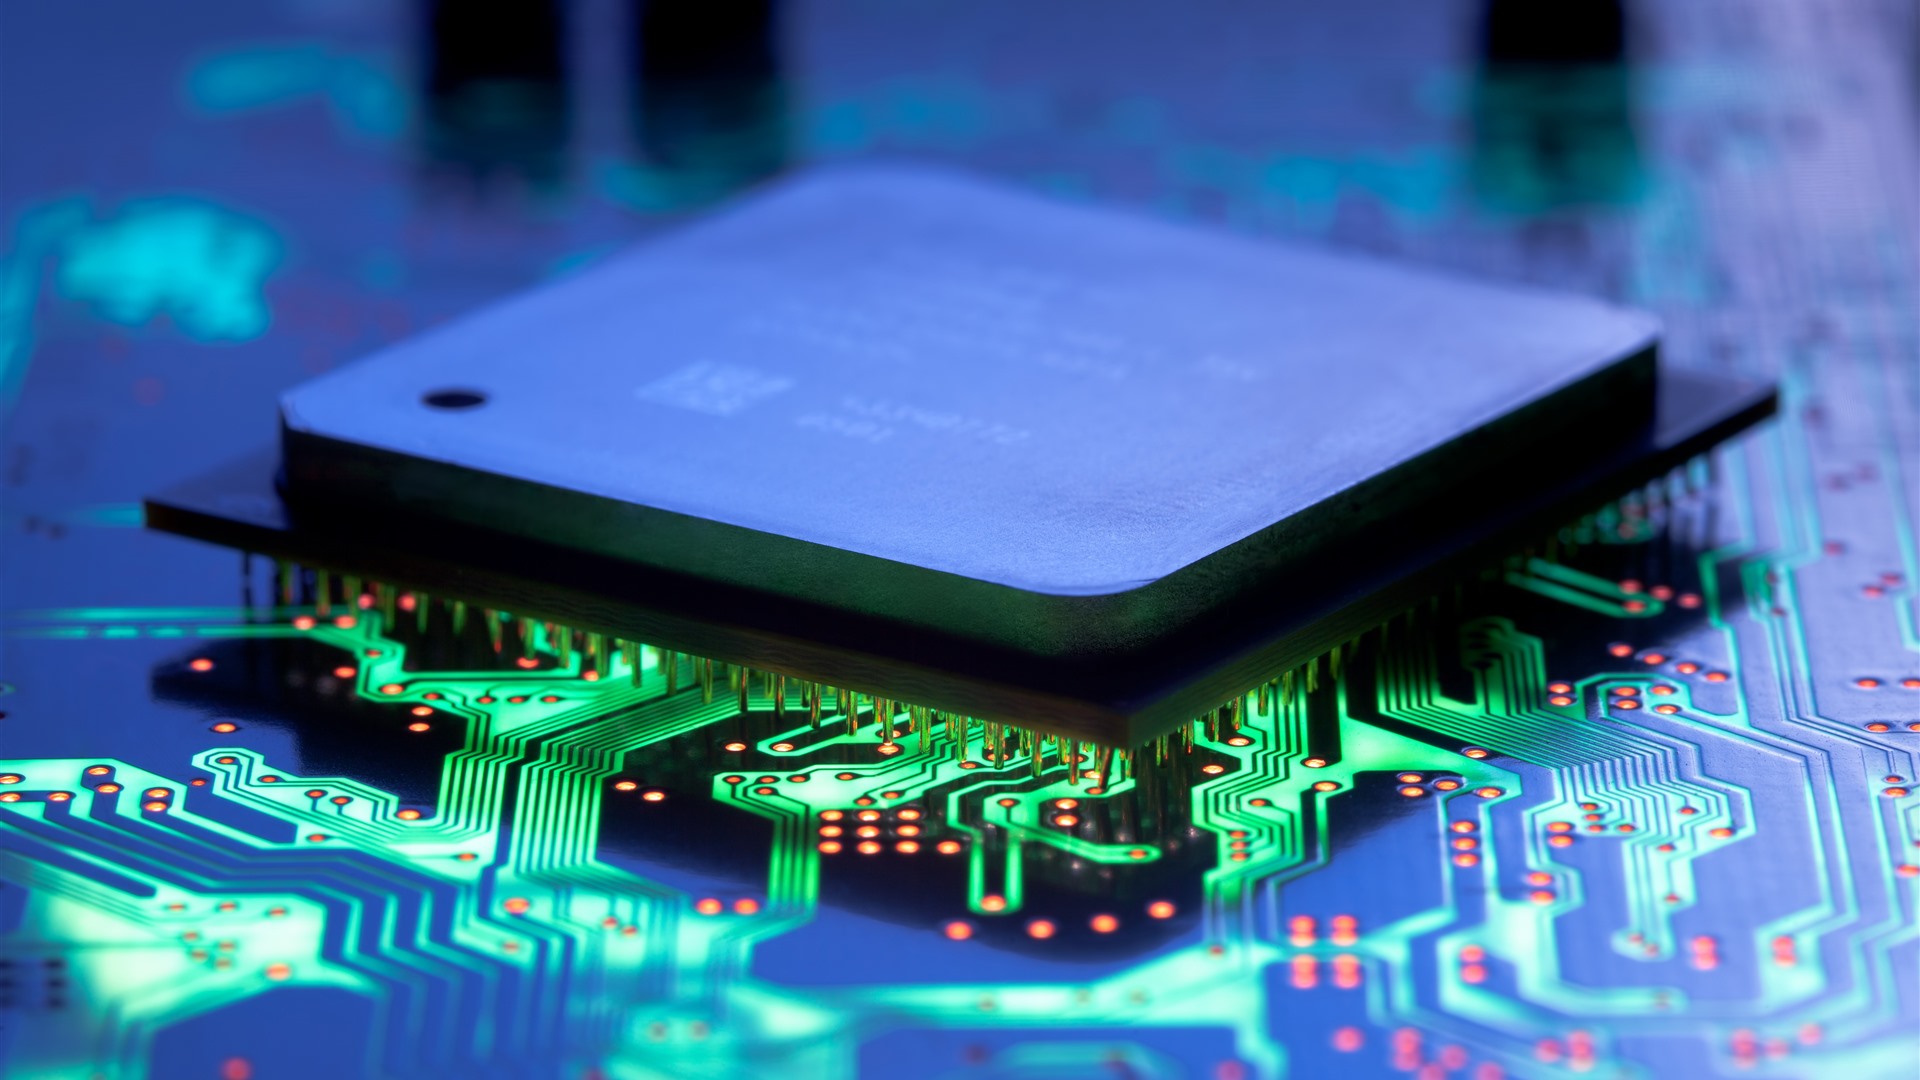 Global Next Generation Memory Technologies Market Is Estimated To Witness High Growth Owing To Technological Advancements & Increasing Demand